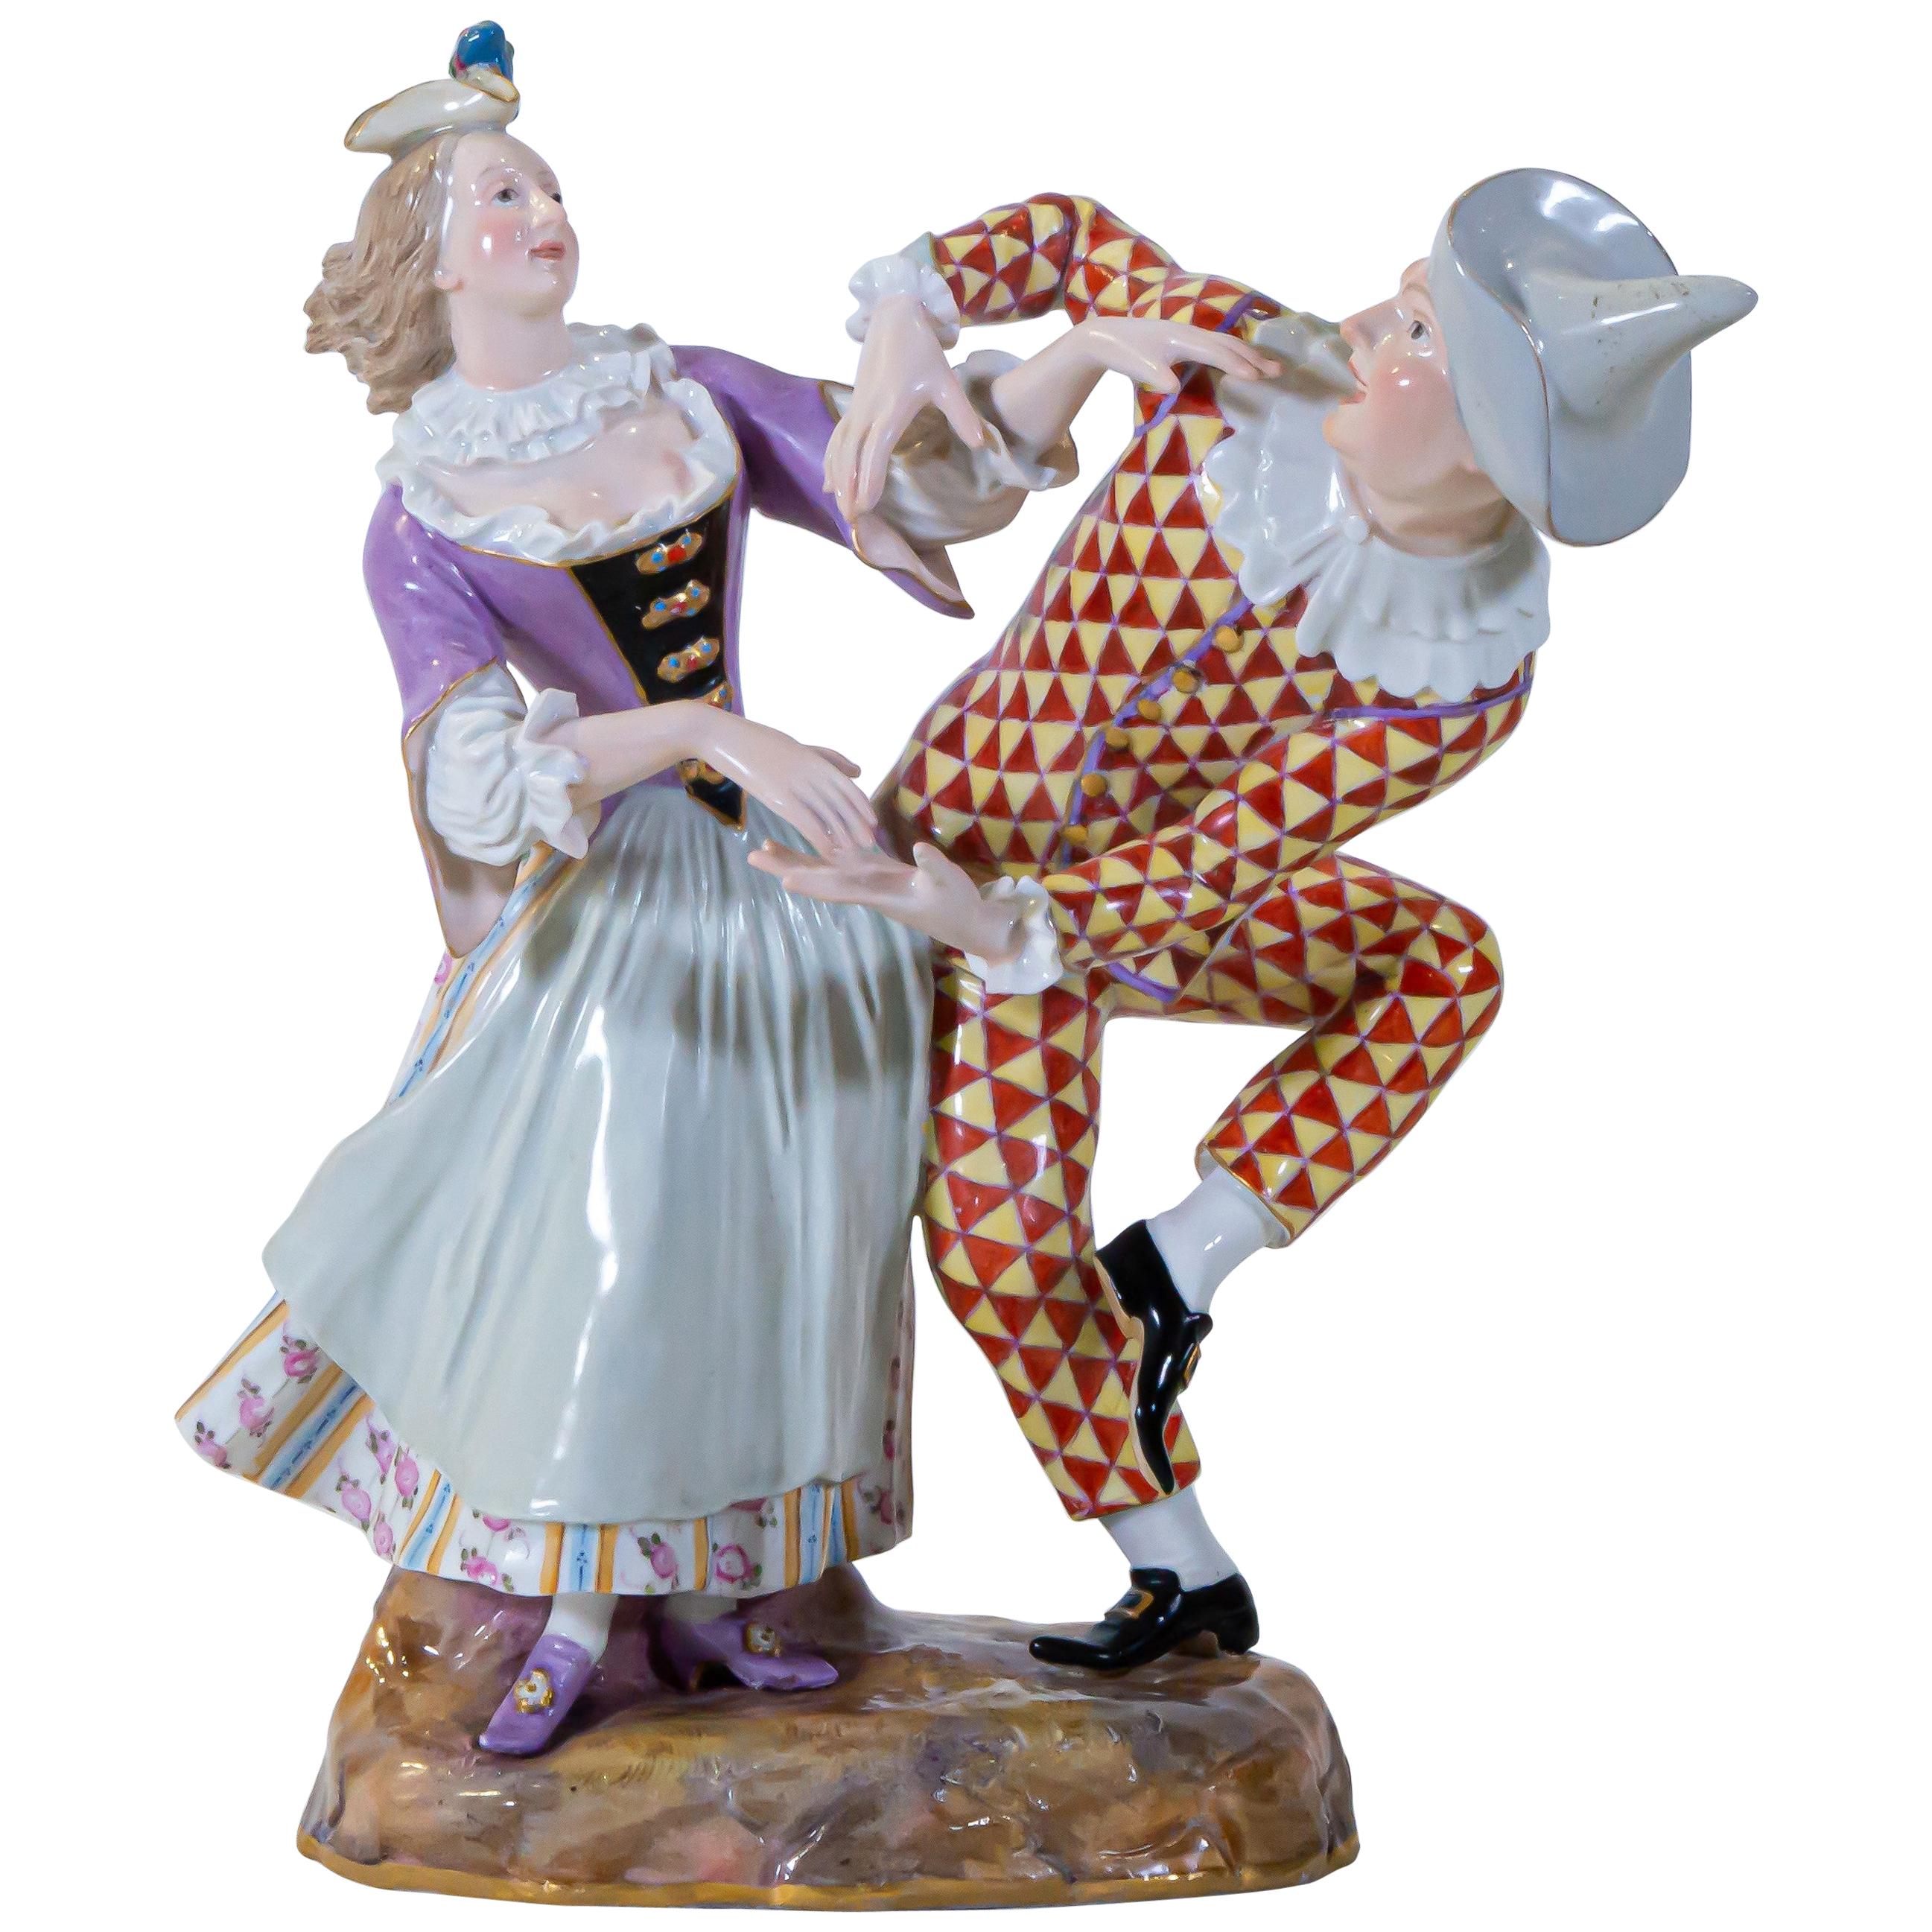 Antique Meissen Group of Commedia Dell"arte, Harlequin and Columbine Dancing